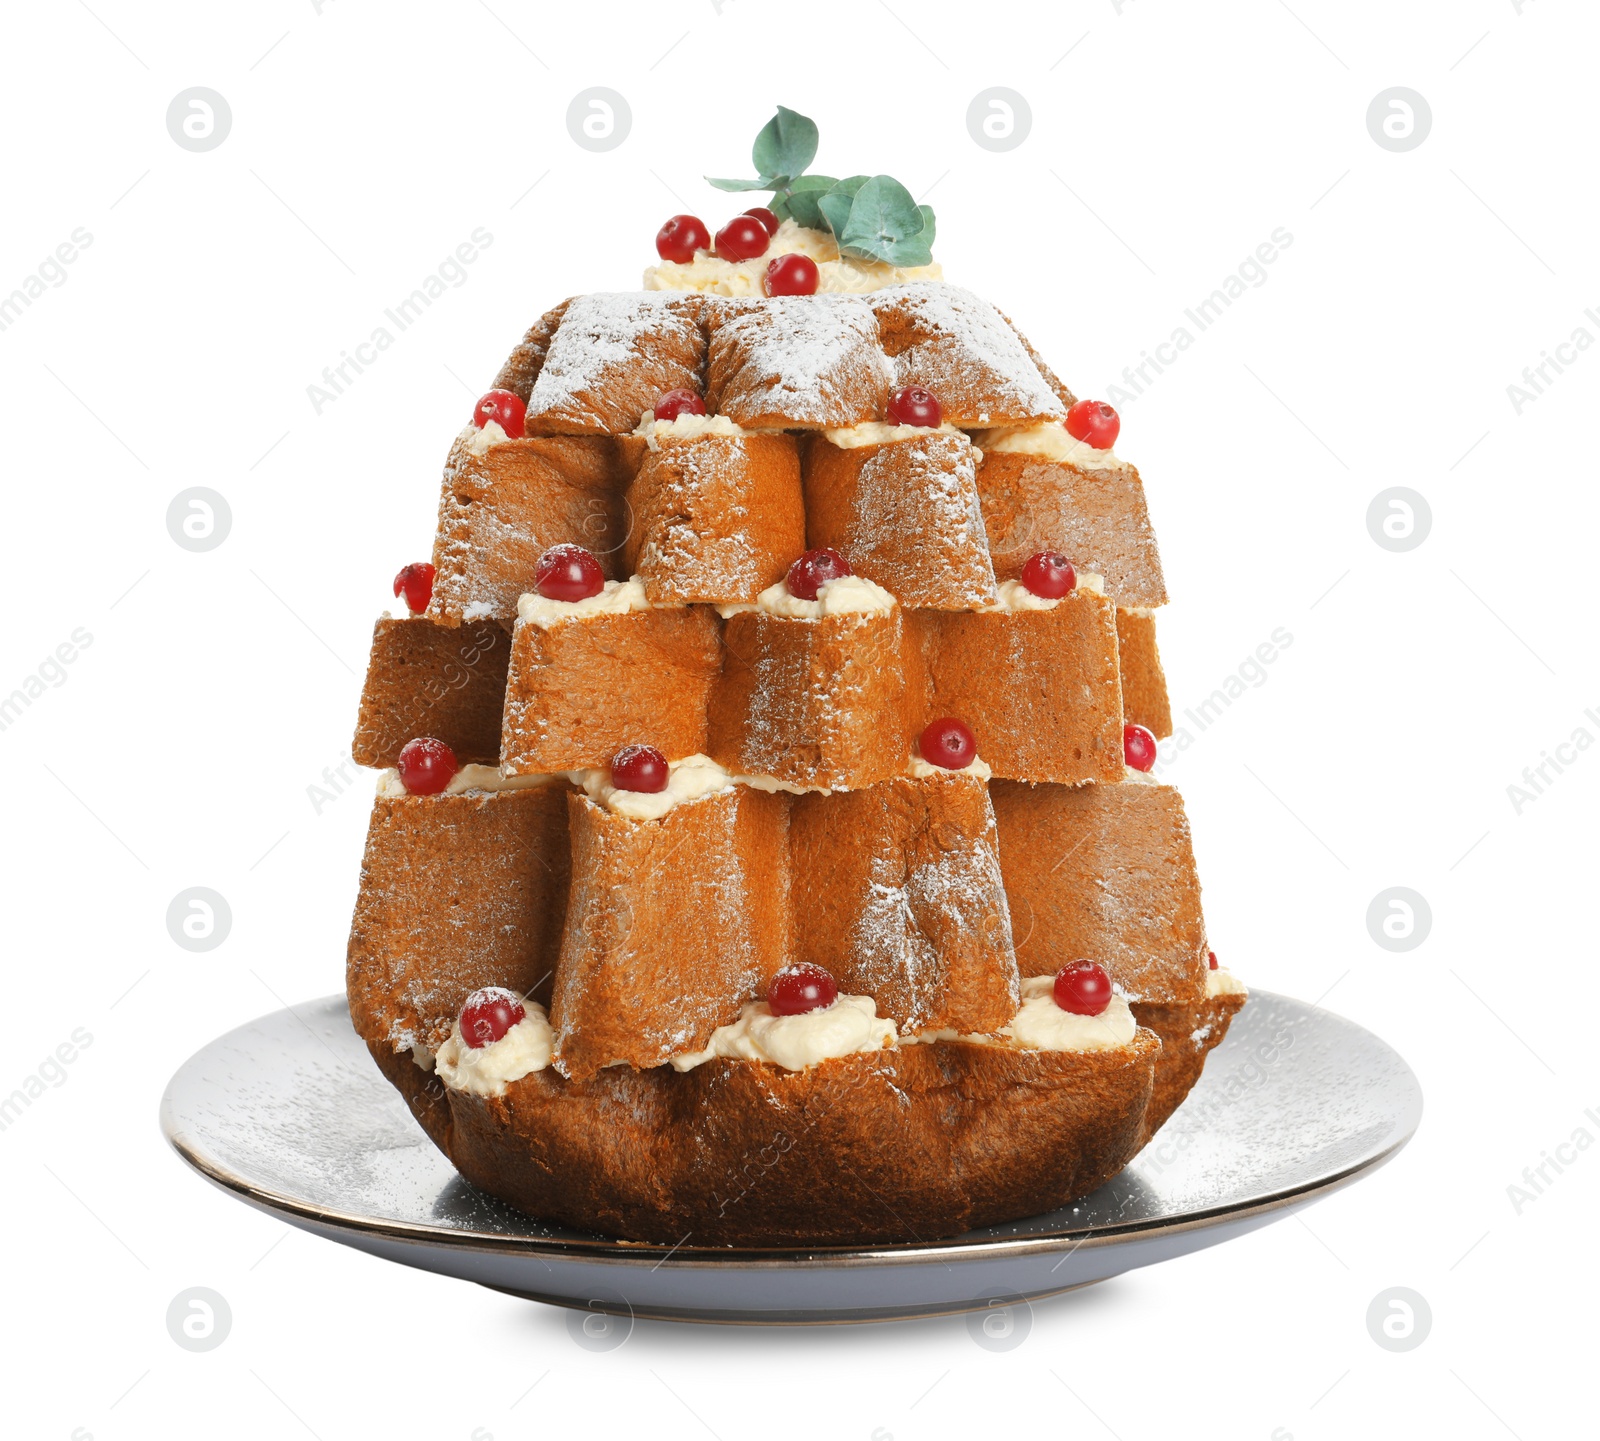 Photo of Delicious Pandoro Christmas tree cake decorated with powdered sugar and berries on white background